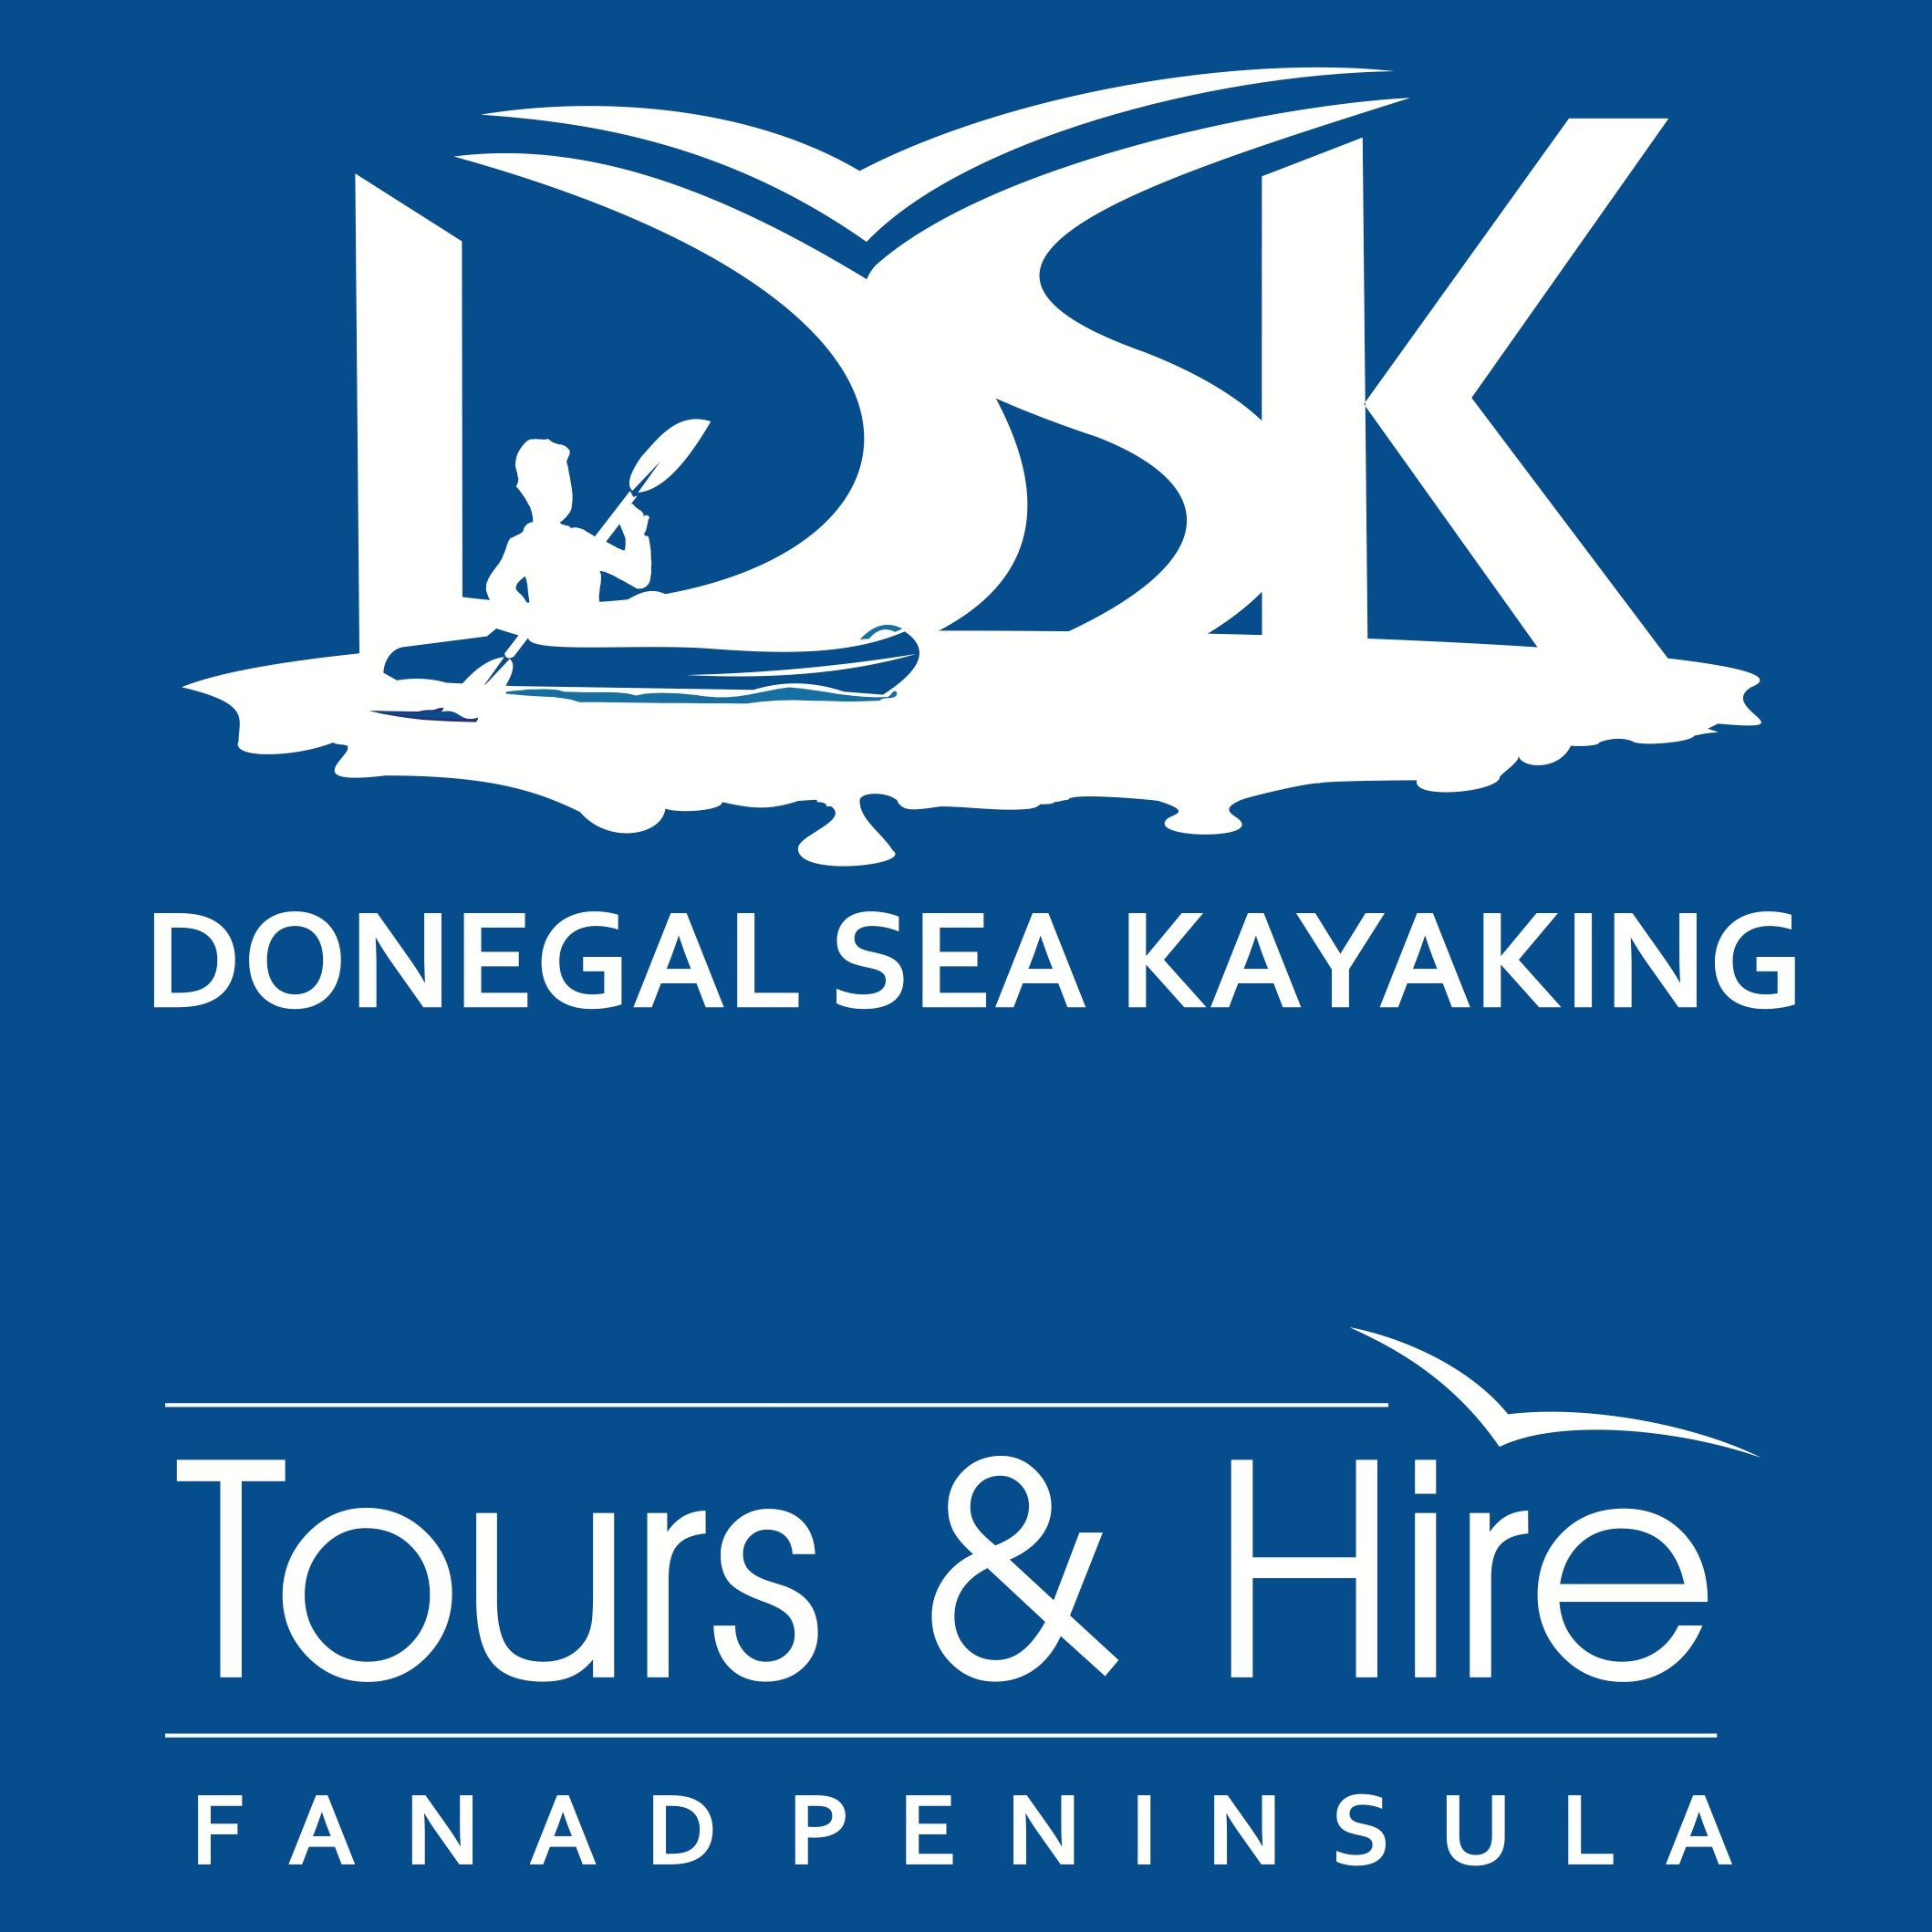 Donegal Sea Kayaking is a mobile sea kayaking tour operator based on the Fanad Peninsula. We cater for novices & experienced, groups & family rates available